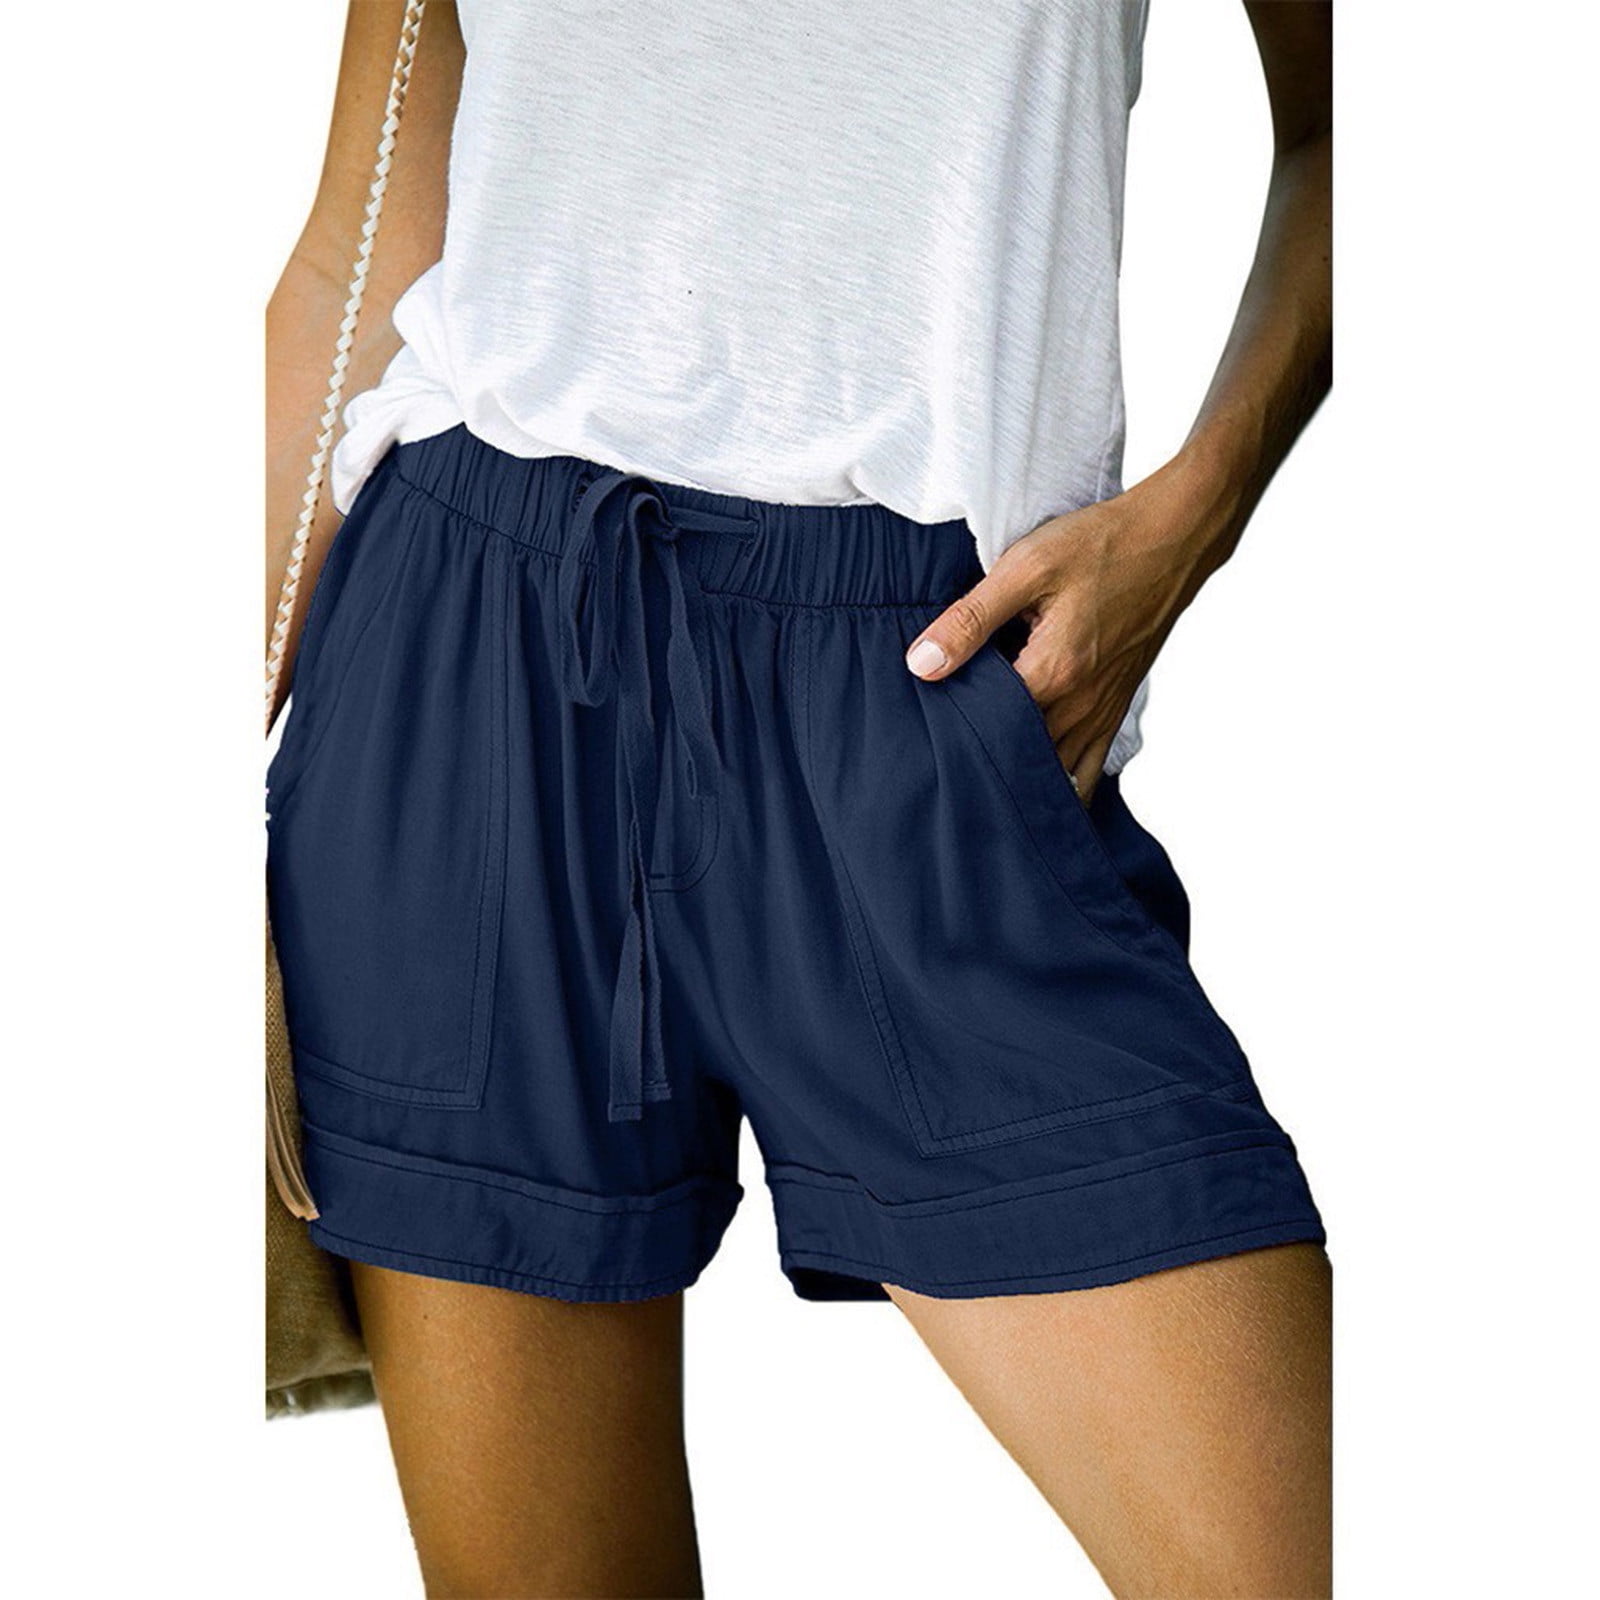 Clearance Under $5 Clothing,POROPL Plus Size Pockets Elastic Waist Solid  Shorts for Women Casual Summer 7 Inch Inseam Navy Size 14 